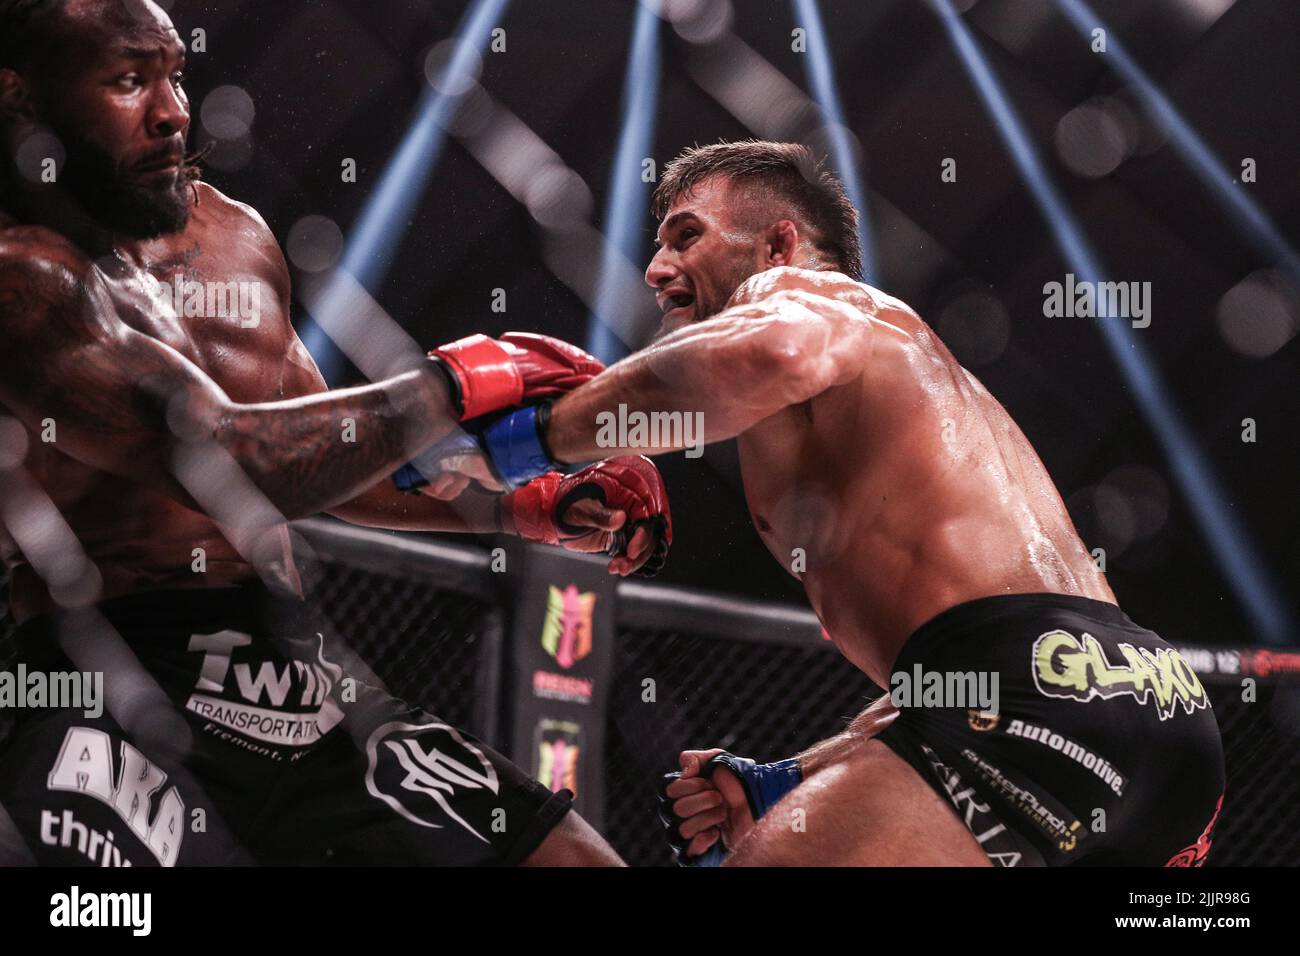 Dalton Rosta loads up for a big right overhand on Romero Cotton at Bellator 283. Dalton Rosta wins by way of knock out in the third round from the Eme Stock Photo